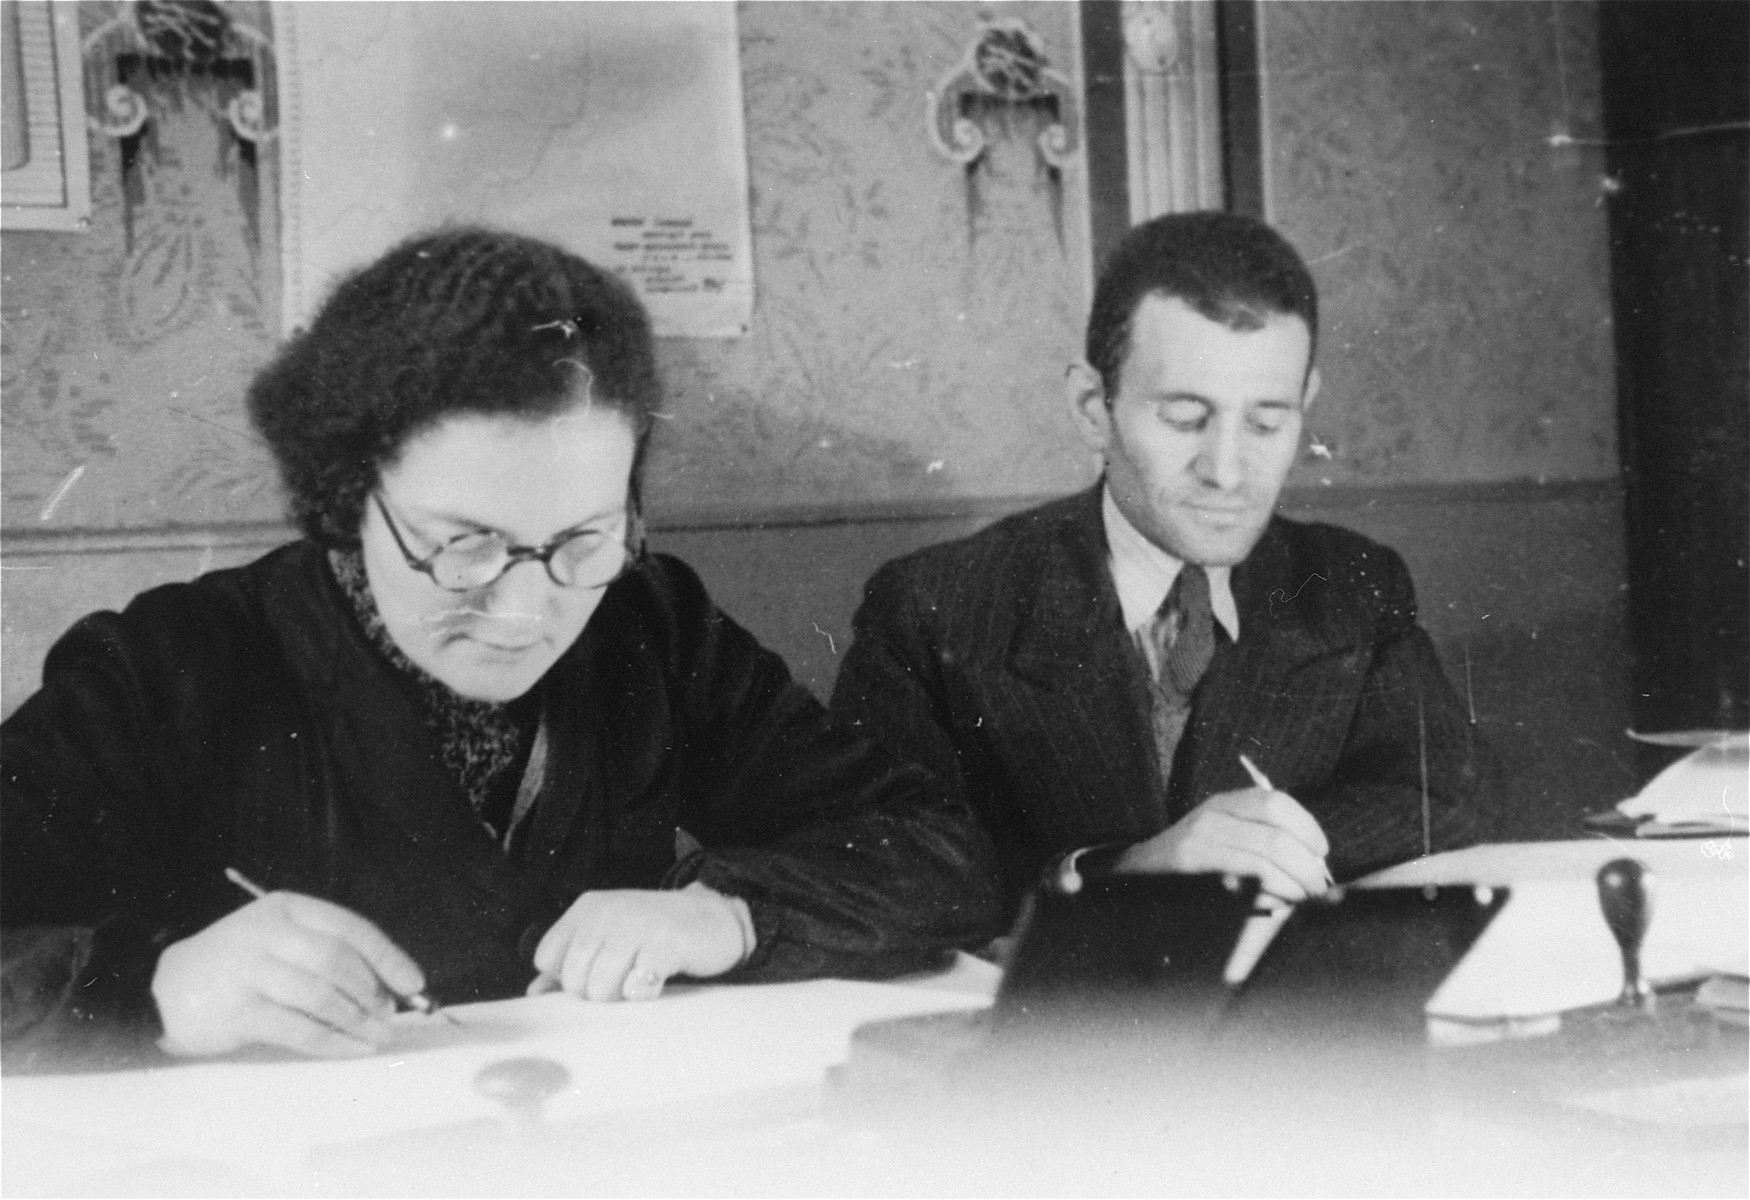 Members of the ghetto administration sit  at a table in the office of the Judenrat in the Kielce ghetto.

This photo was one the images included in an official album prepared by the Judenrat of the Kielce ghetto in 1942.